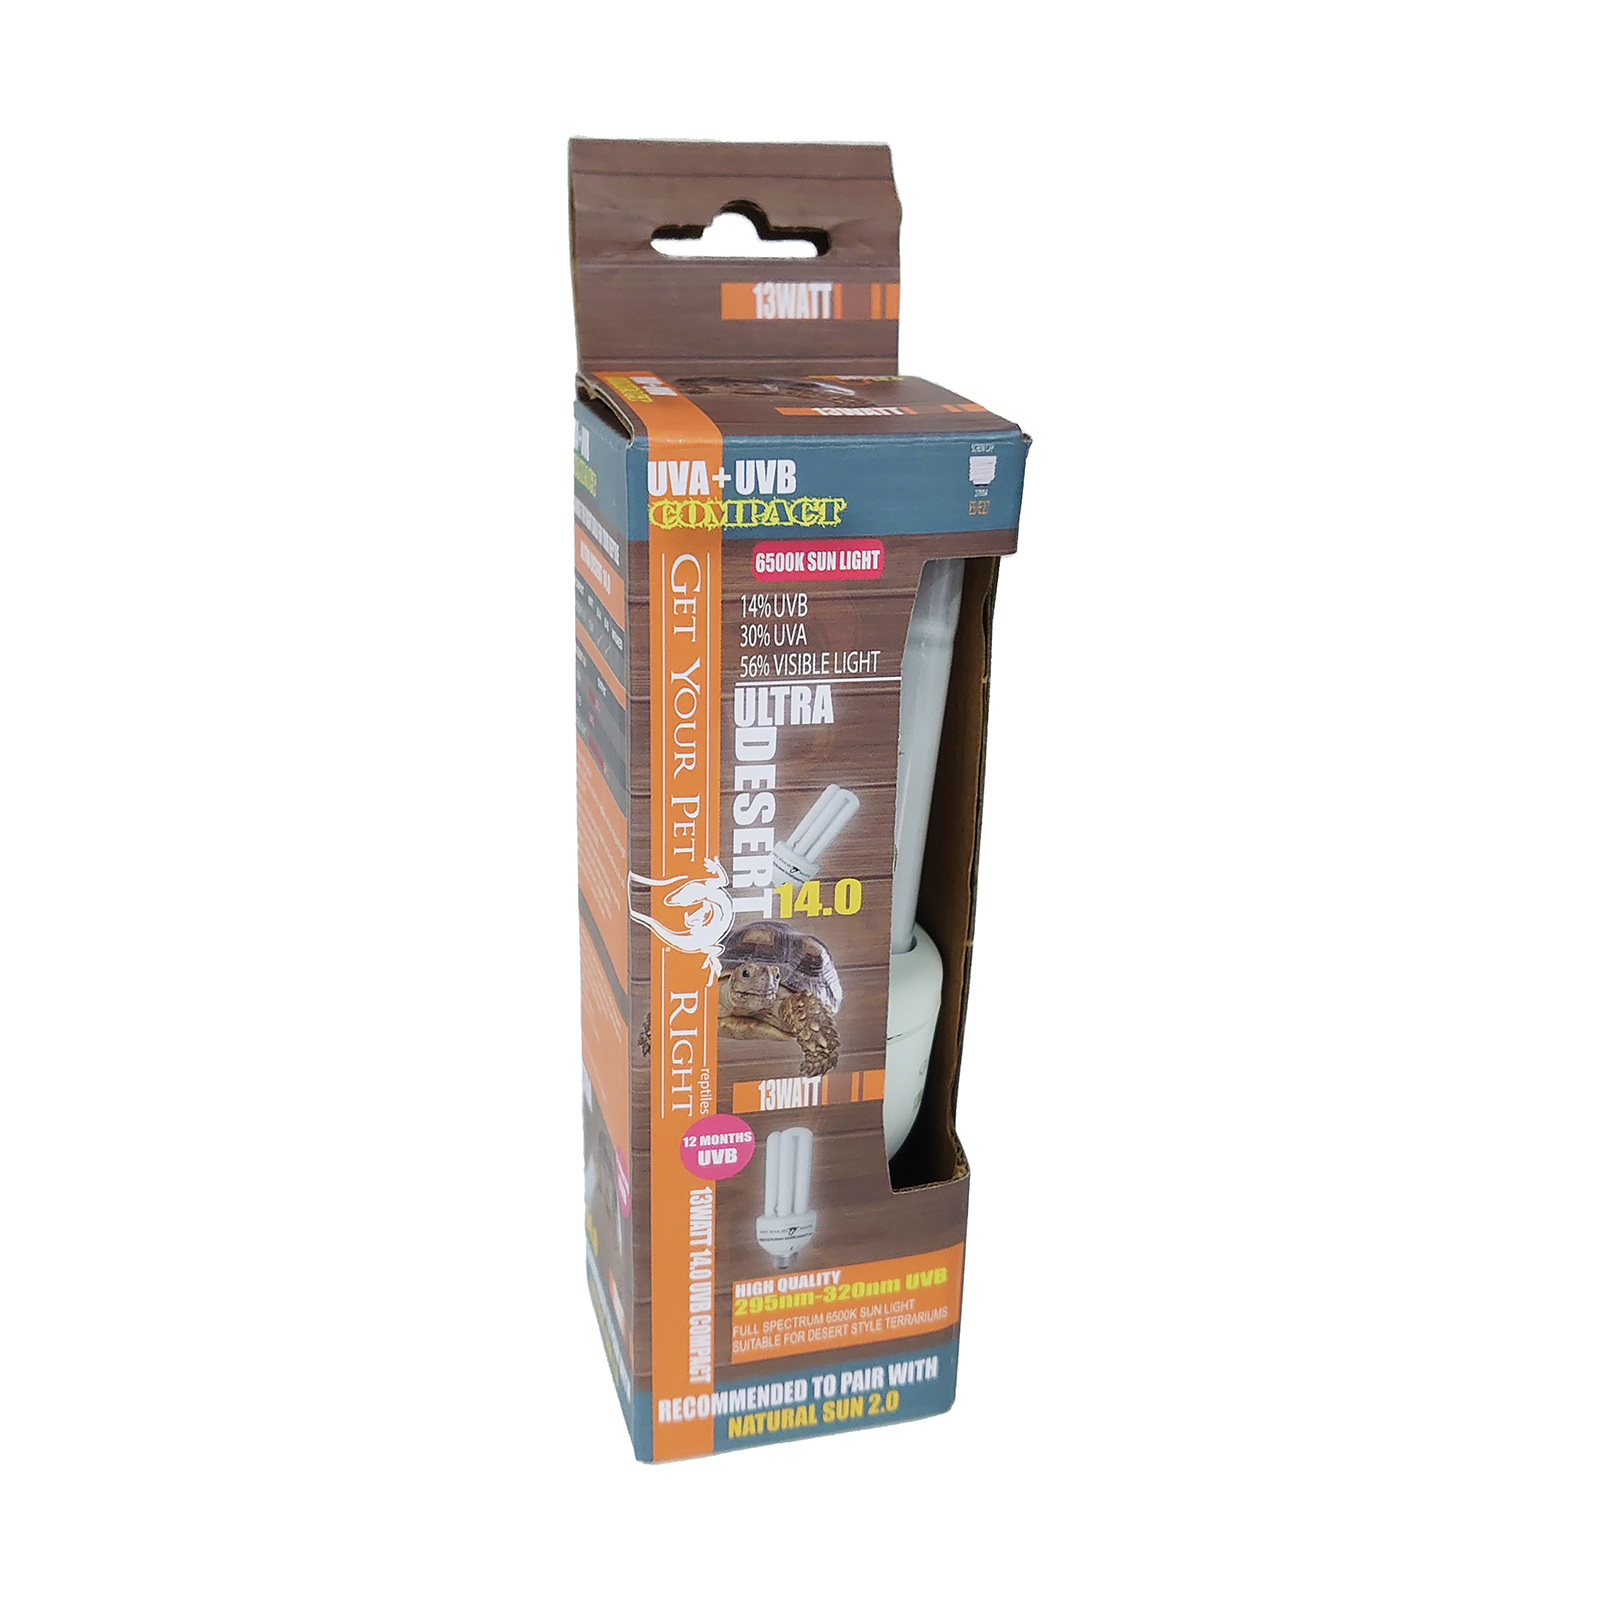 Get Your Pet Right Compact UVB Light